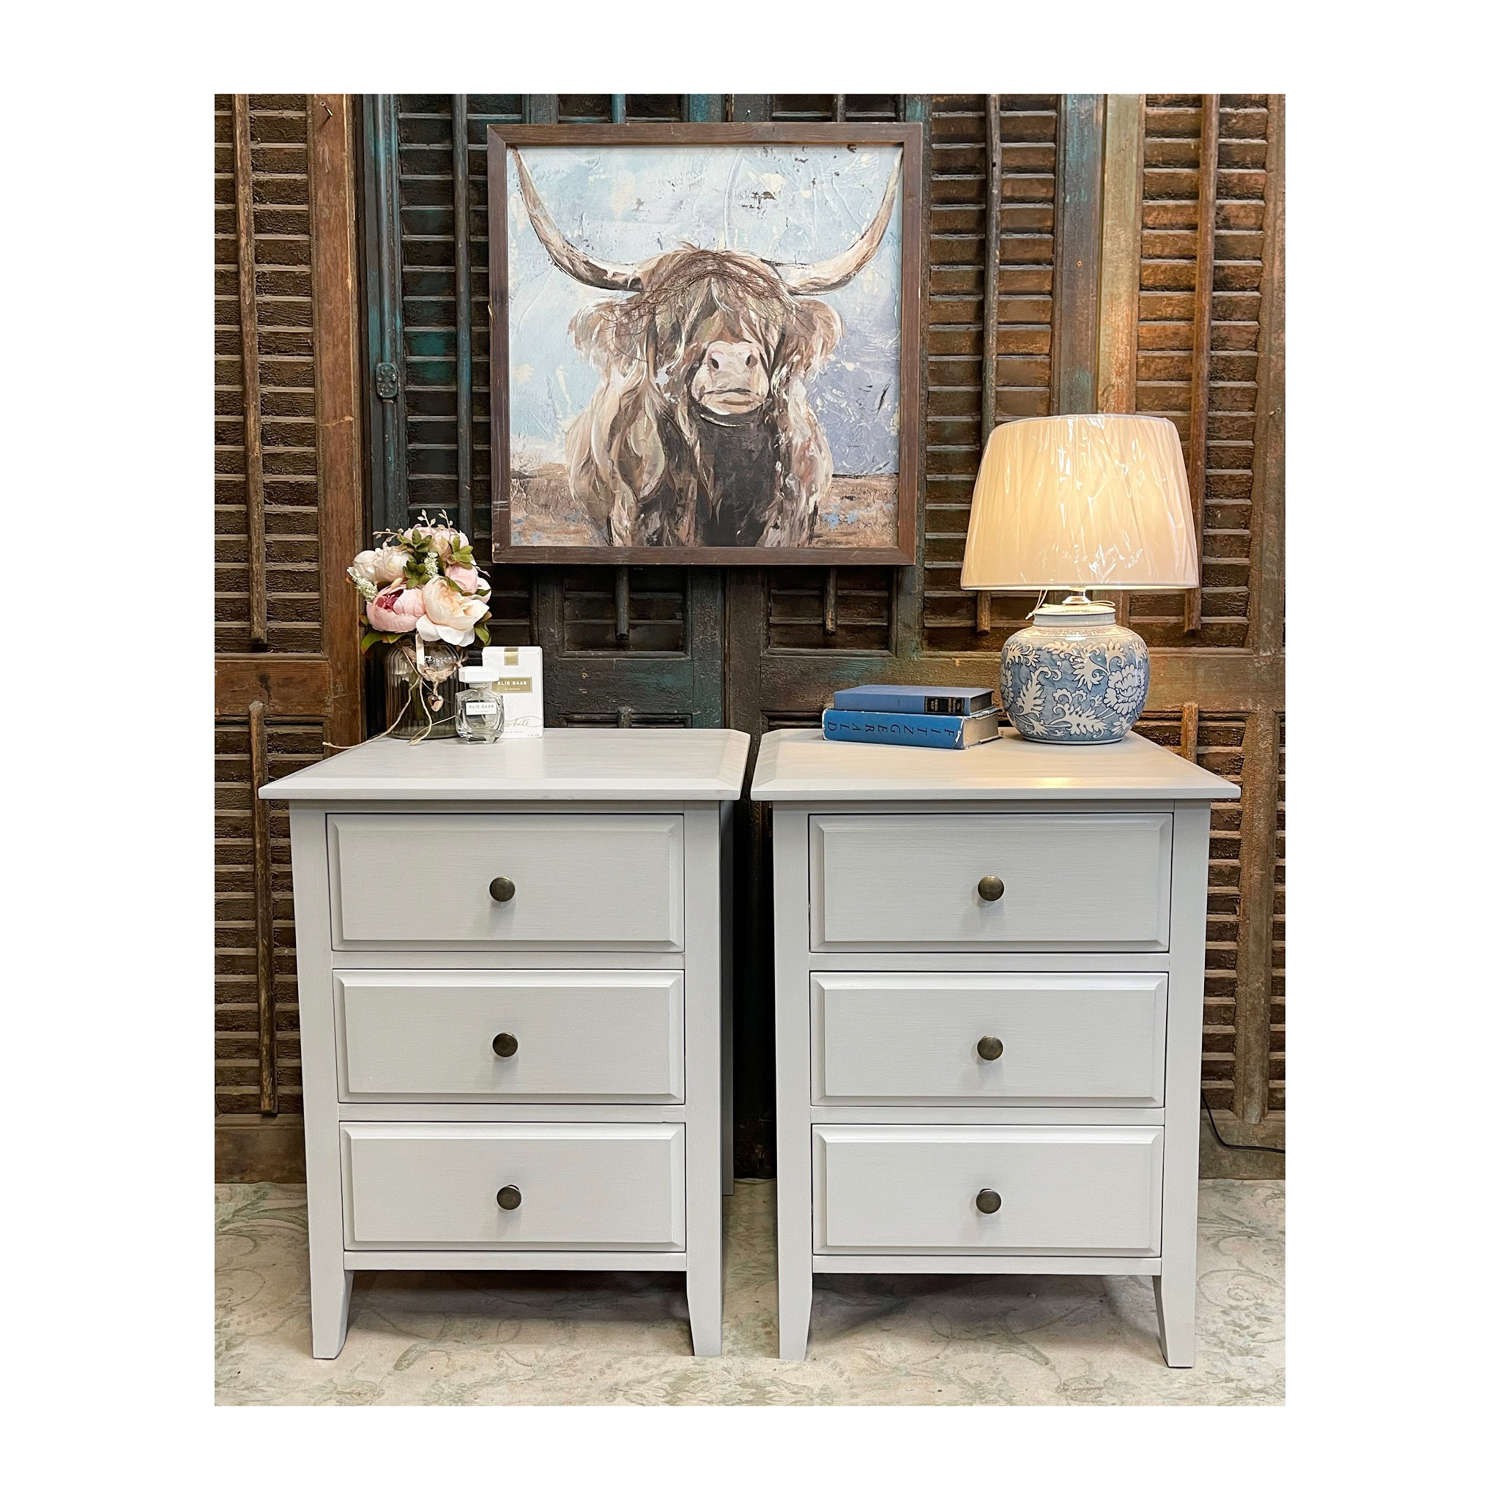 Pair of Painted Bedside Chests